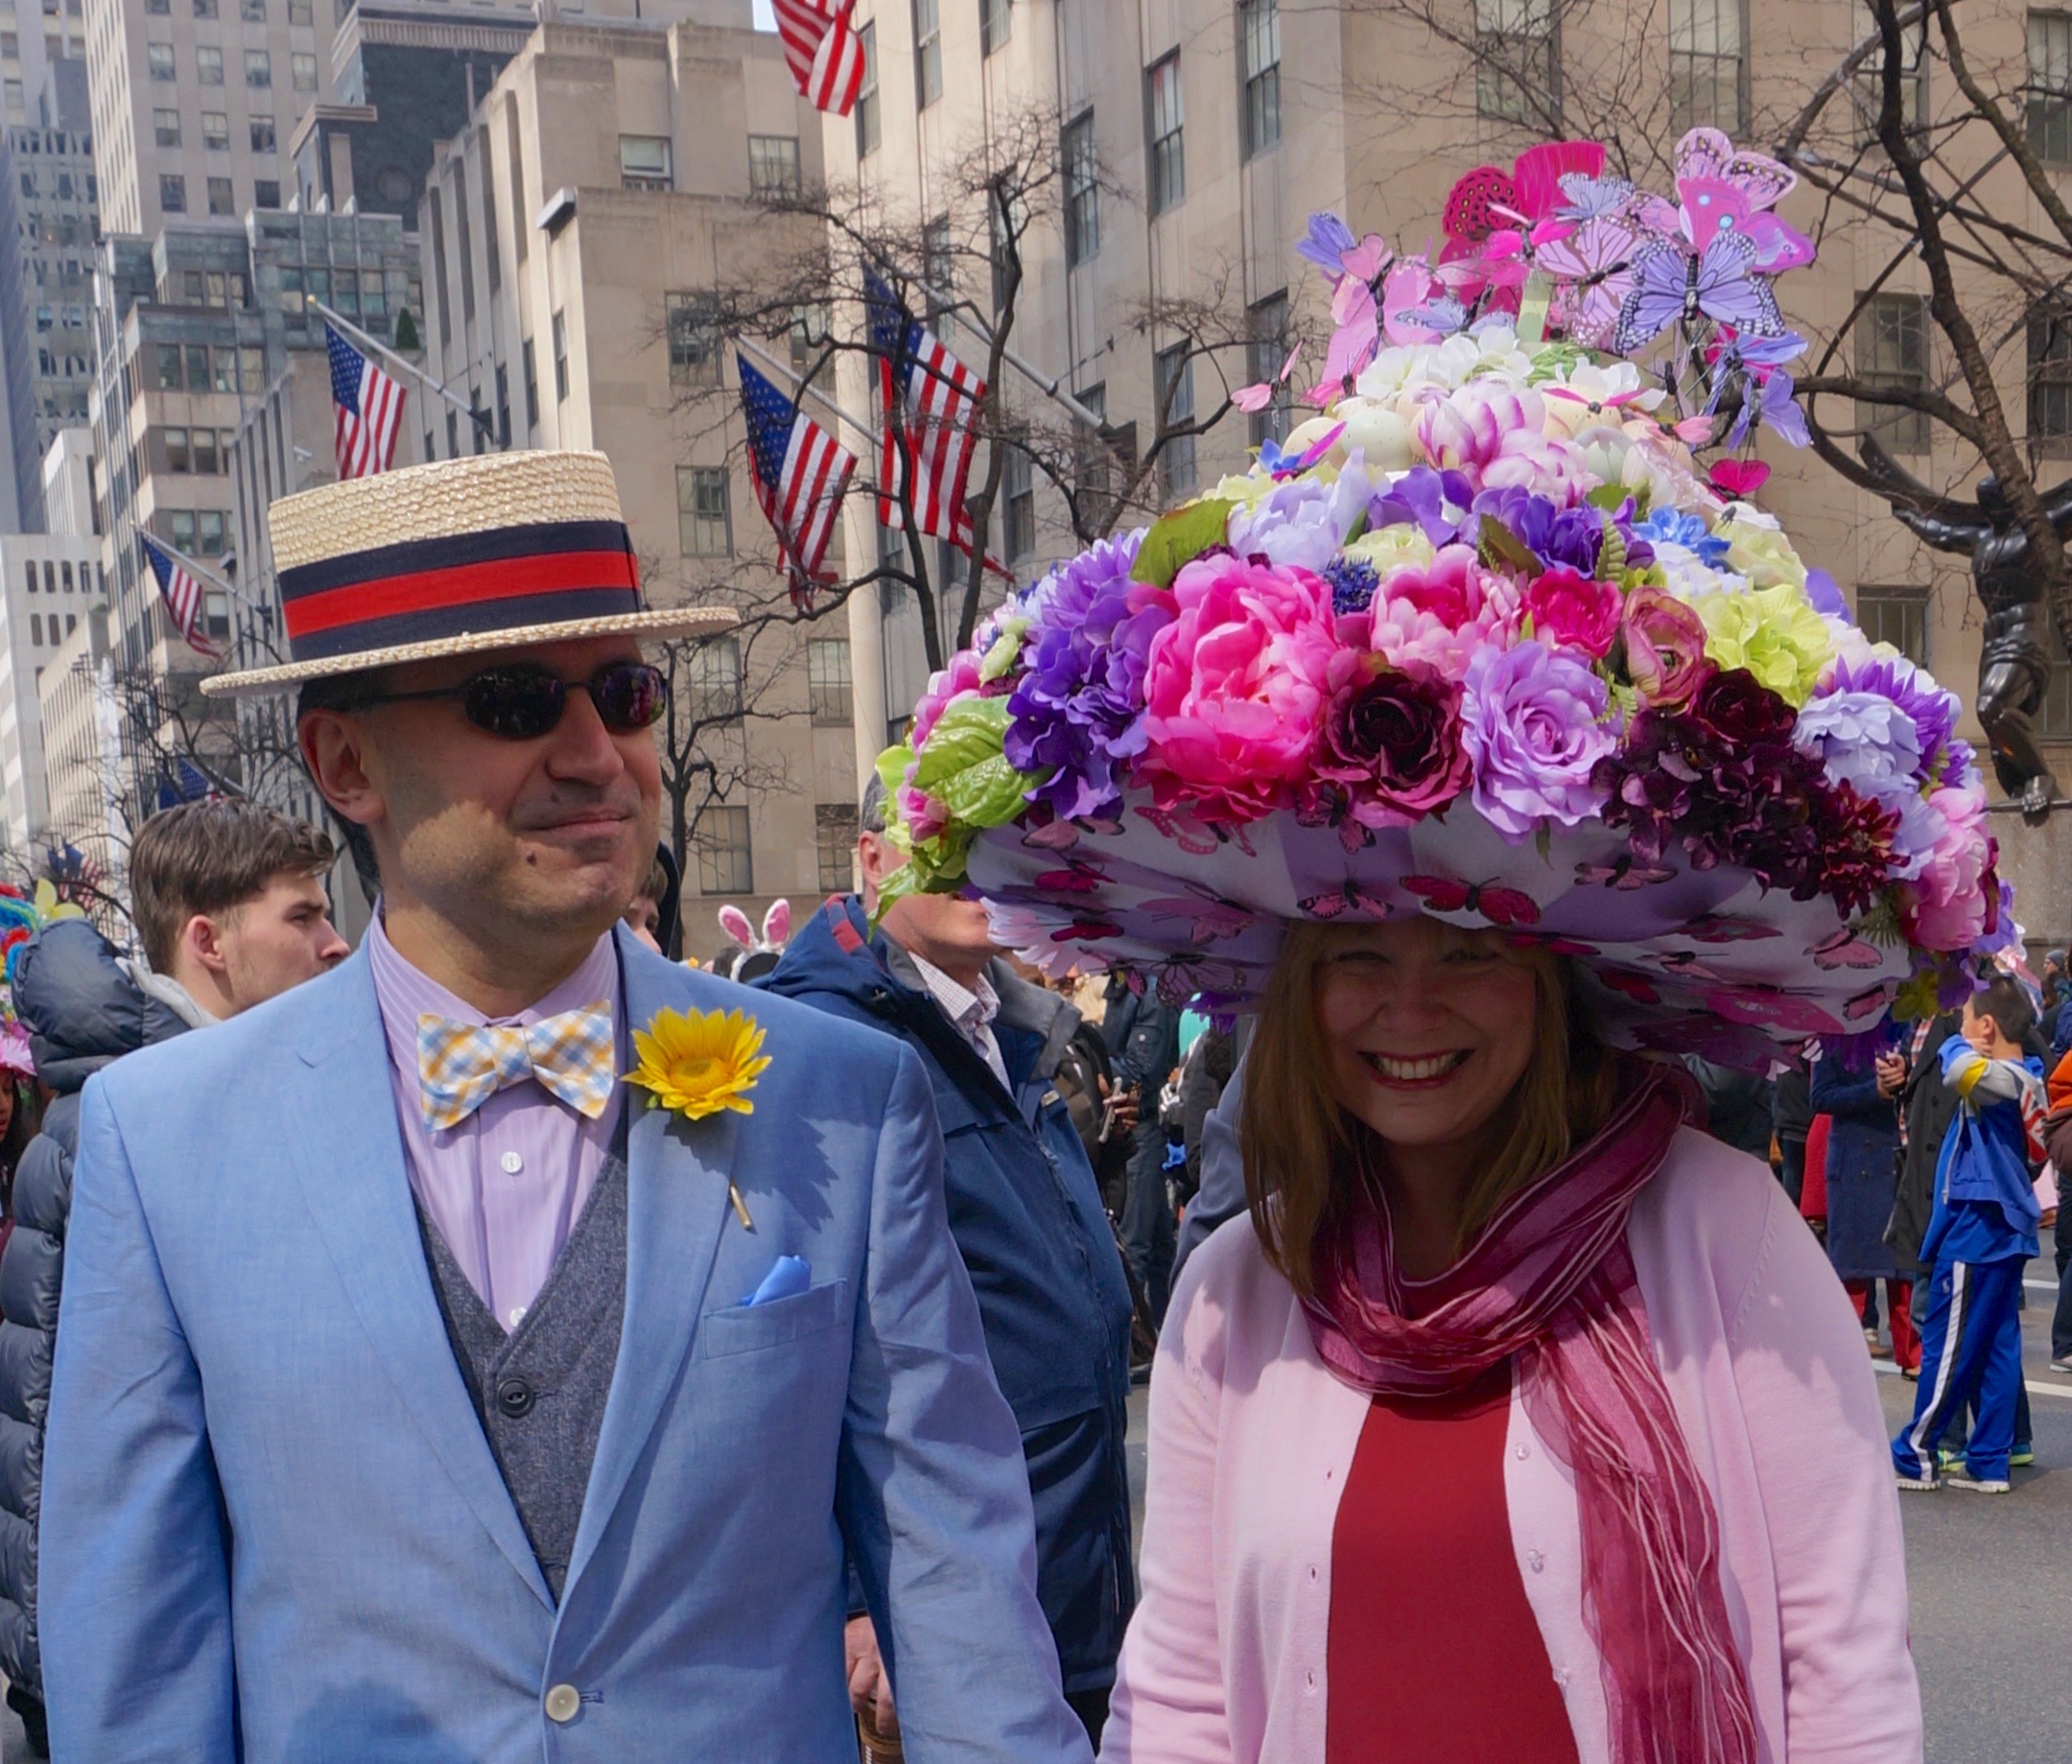 The NYC Easter Parade 2020 was canceled, so here's a virtual